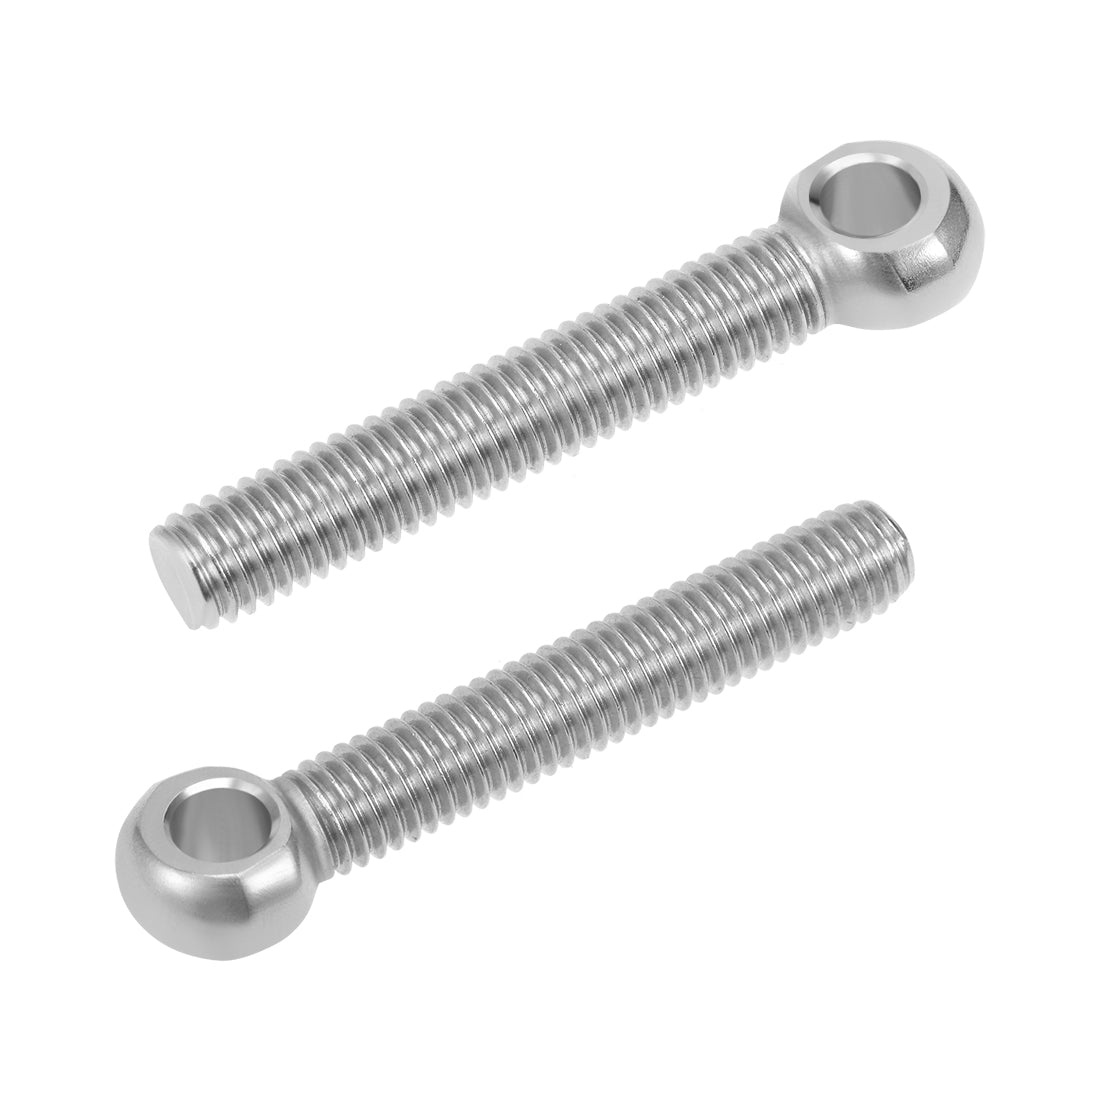 uxcell Uxcell M8 x 50mm Machinery Shoulder Swing Lifting Eye Bolt 304 Stainless Steel Metric Thread 2pcs